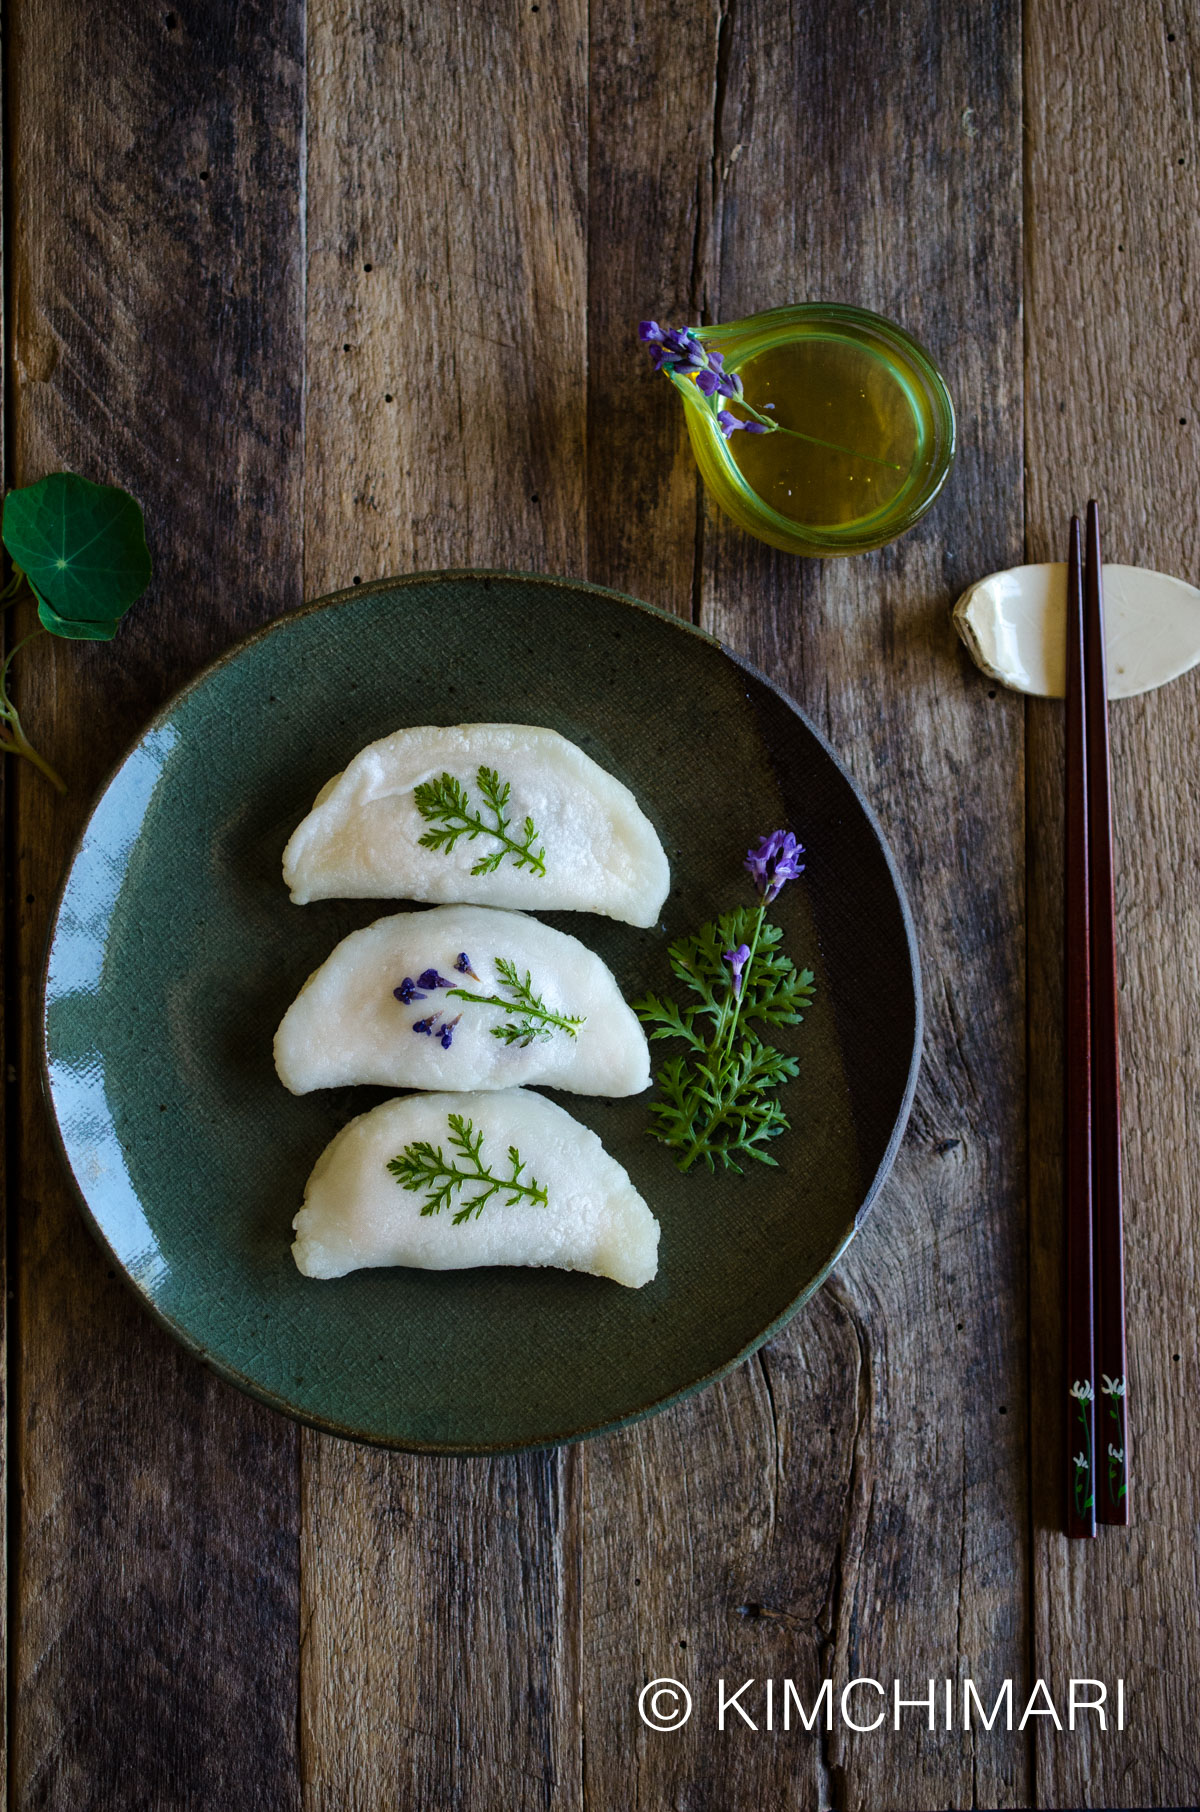 Pan-fried Rice Cake Dumplings (Bukkumi) filled with Sweet Red Beans with Fresh Ssukat and Lavender